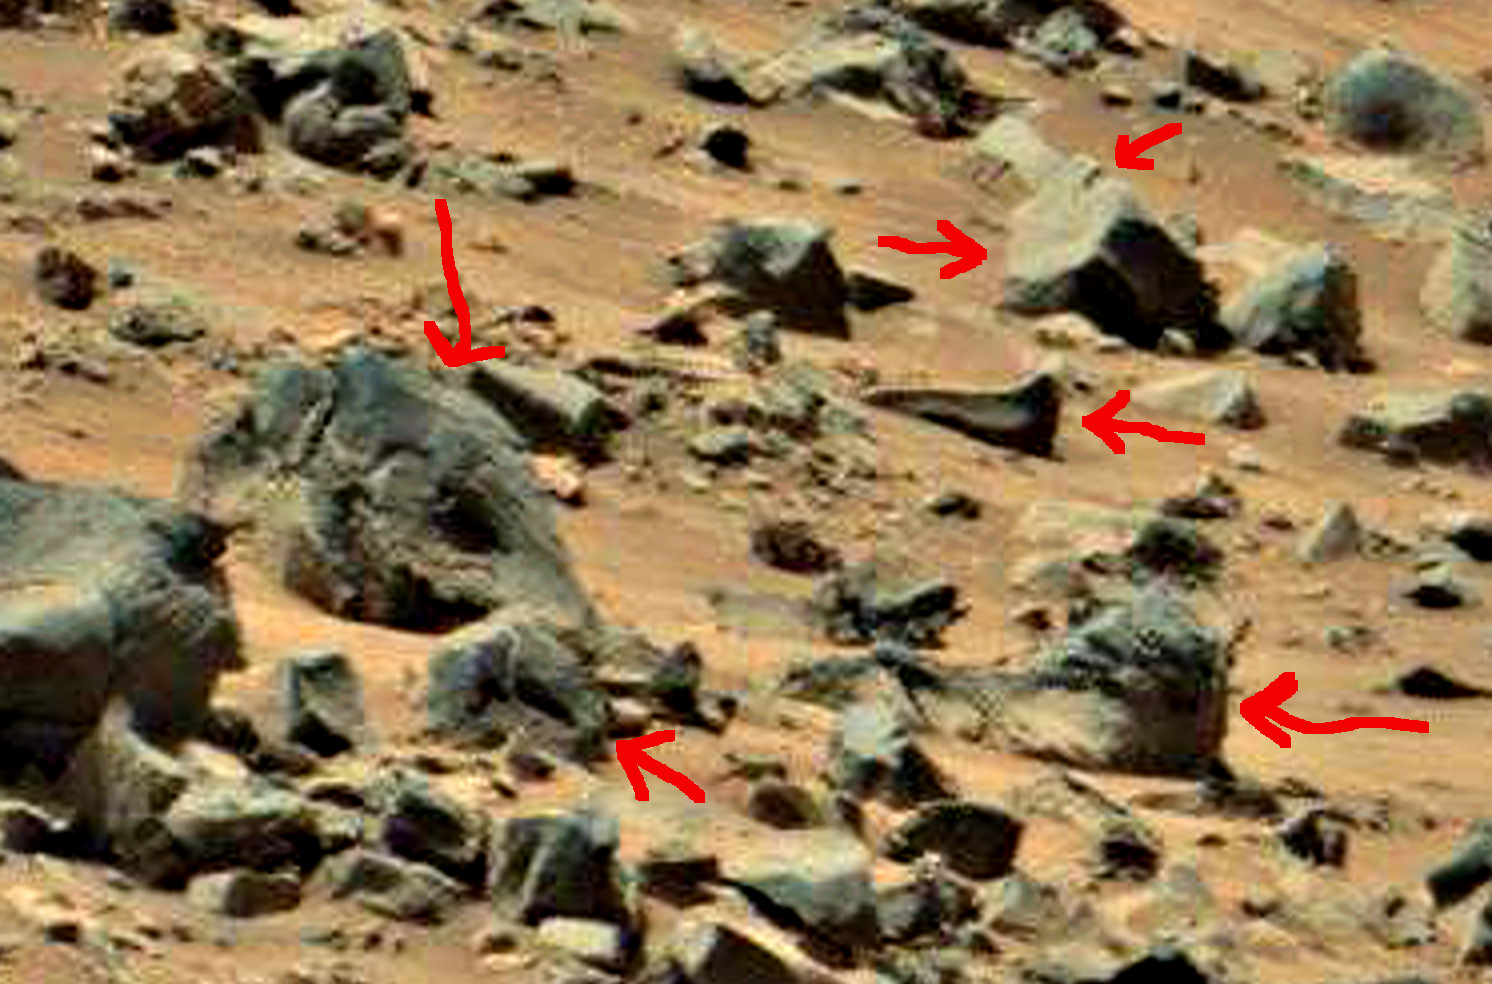 Sol-710-mars-rover-artifacts-harry-12